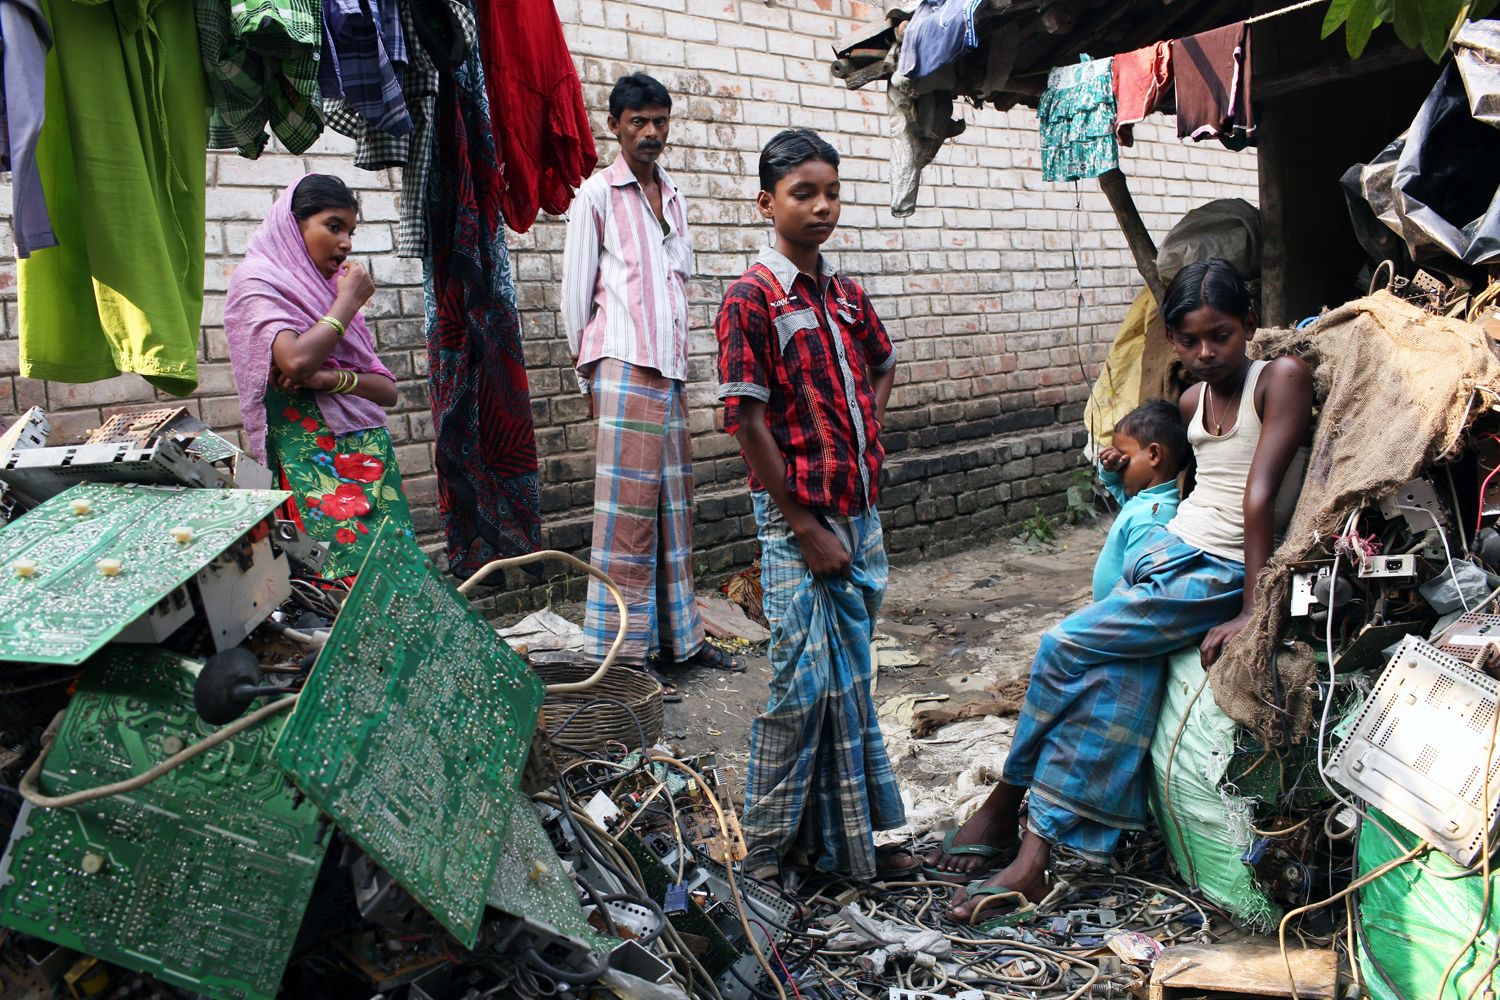 Villagers stand among piles of e-waste in the village of Sangrampur, located south of Kolkata in northeast India. Globally, an estimated 50 million tons of e-waste are produced annually, and much of it ends up in countries like India. Image by Sean Gallagher. India, 2013.